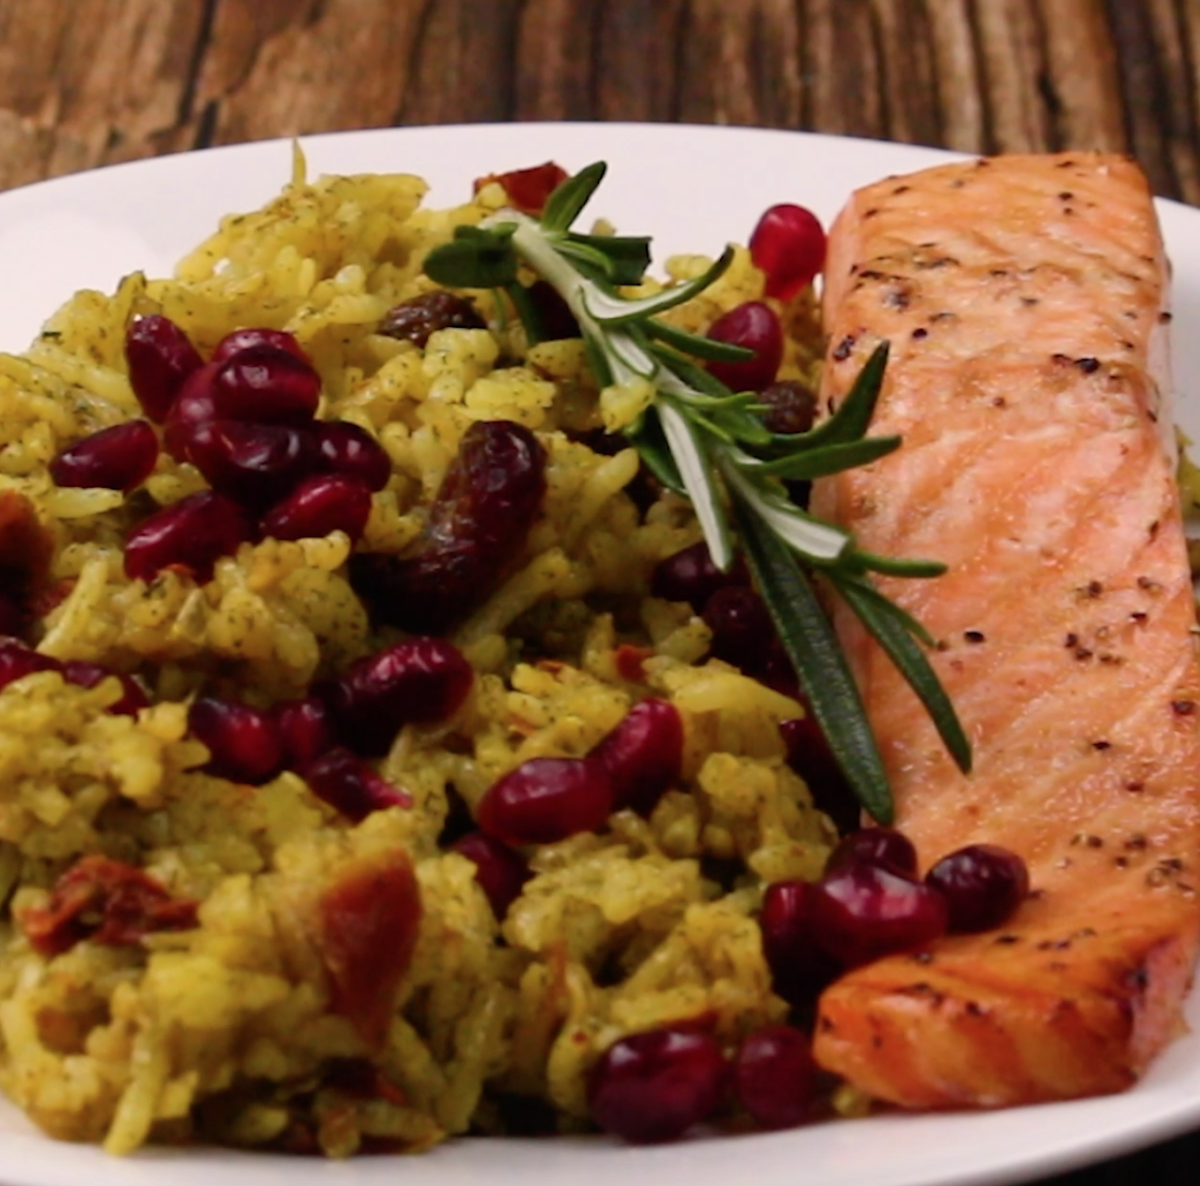 Pomegranate Salmon with Festive Herb Pilaf